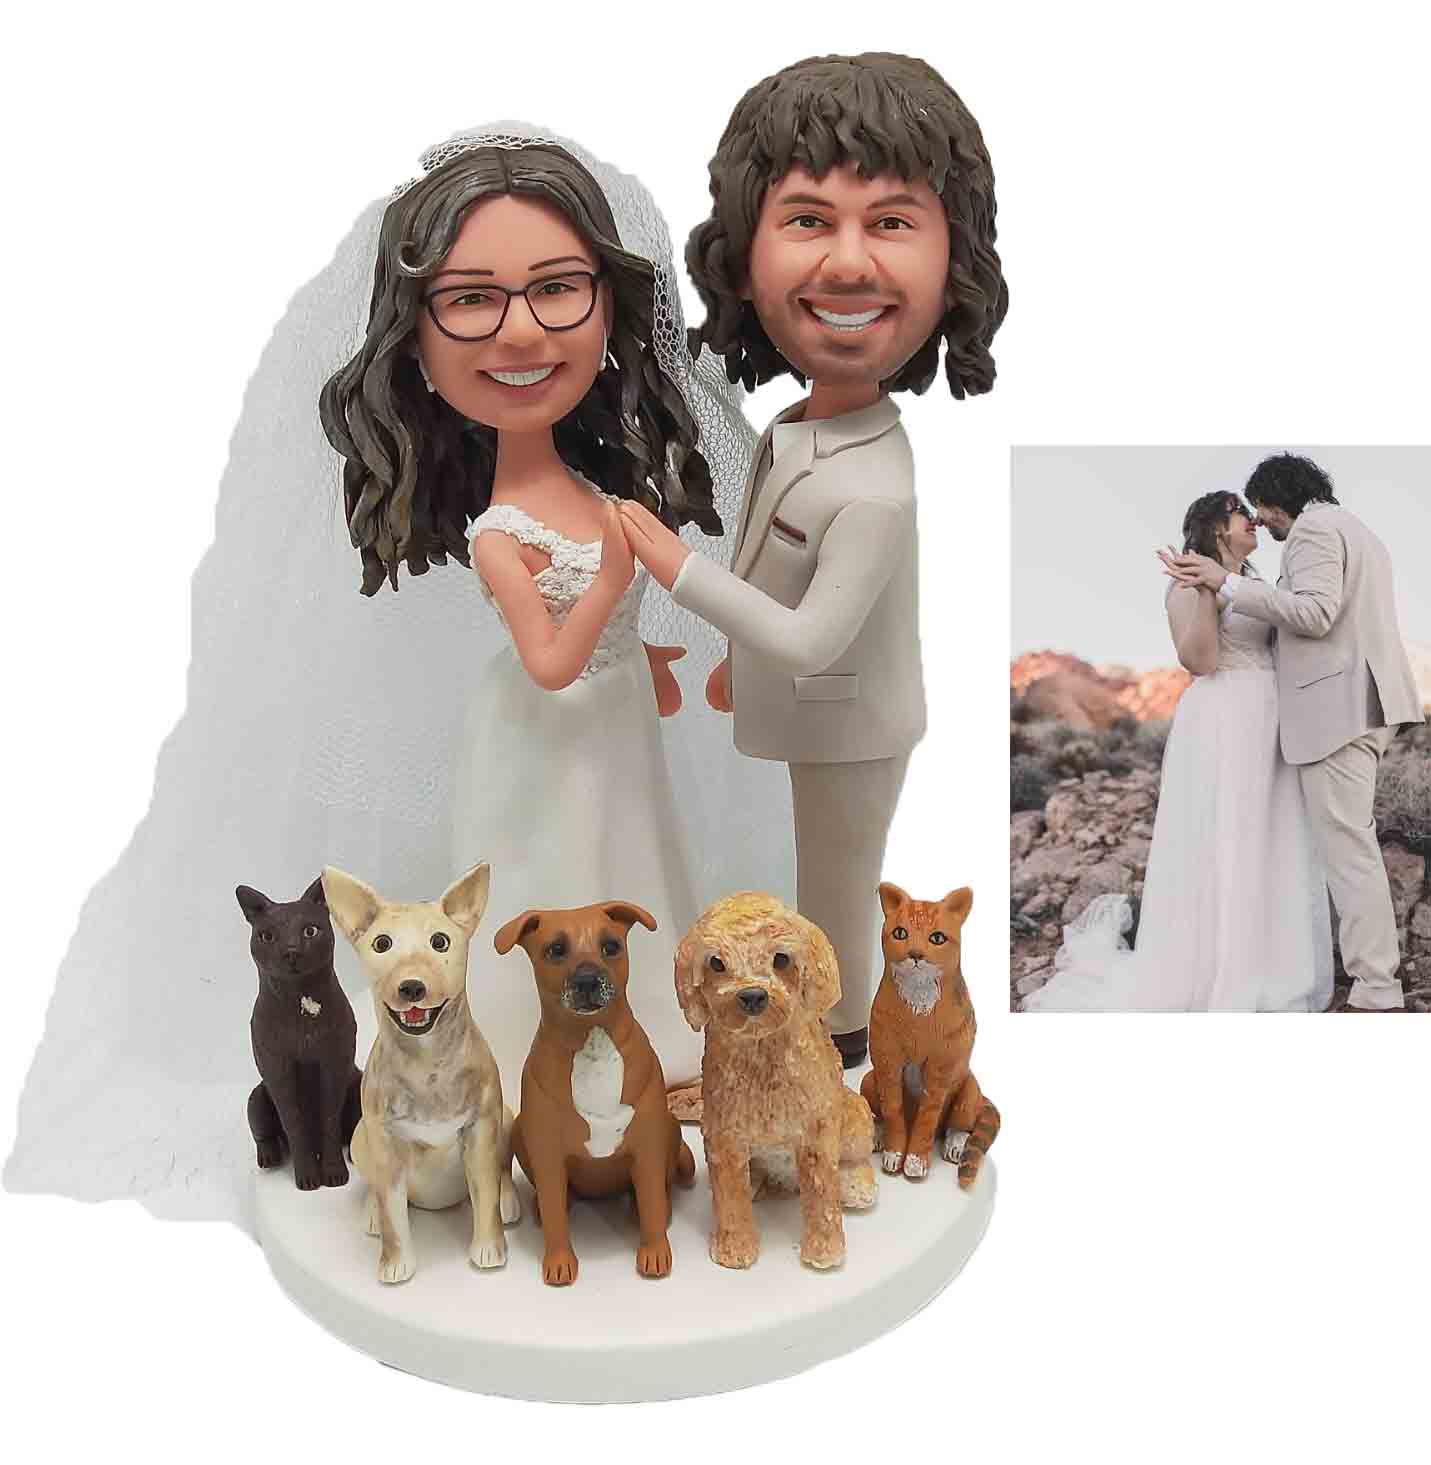 Custom cake toppers Customized wedding cake toppers figurines toppers(Not Pet)